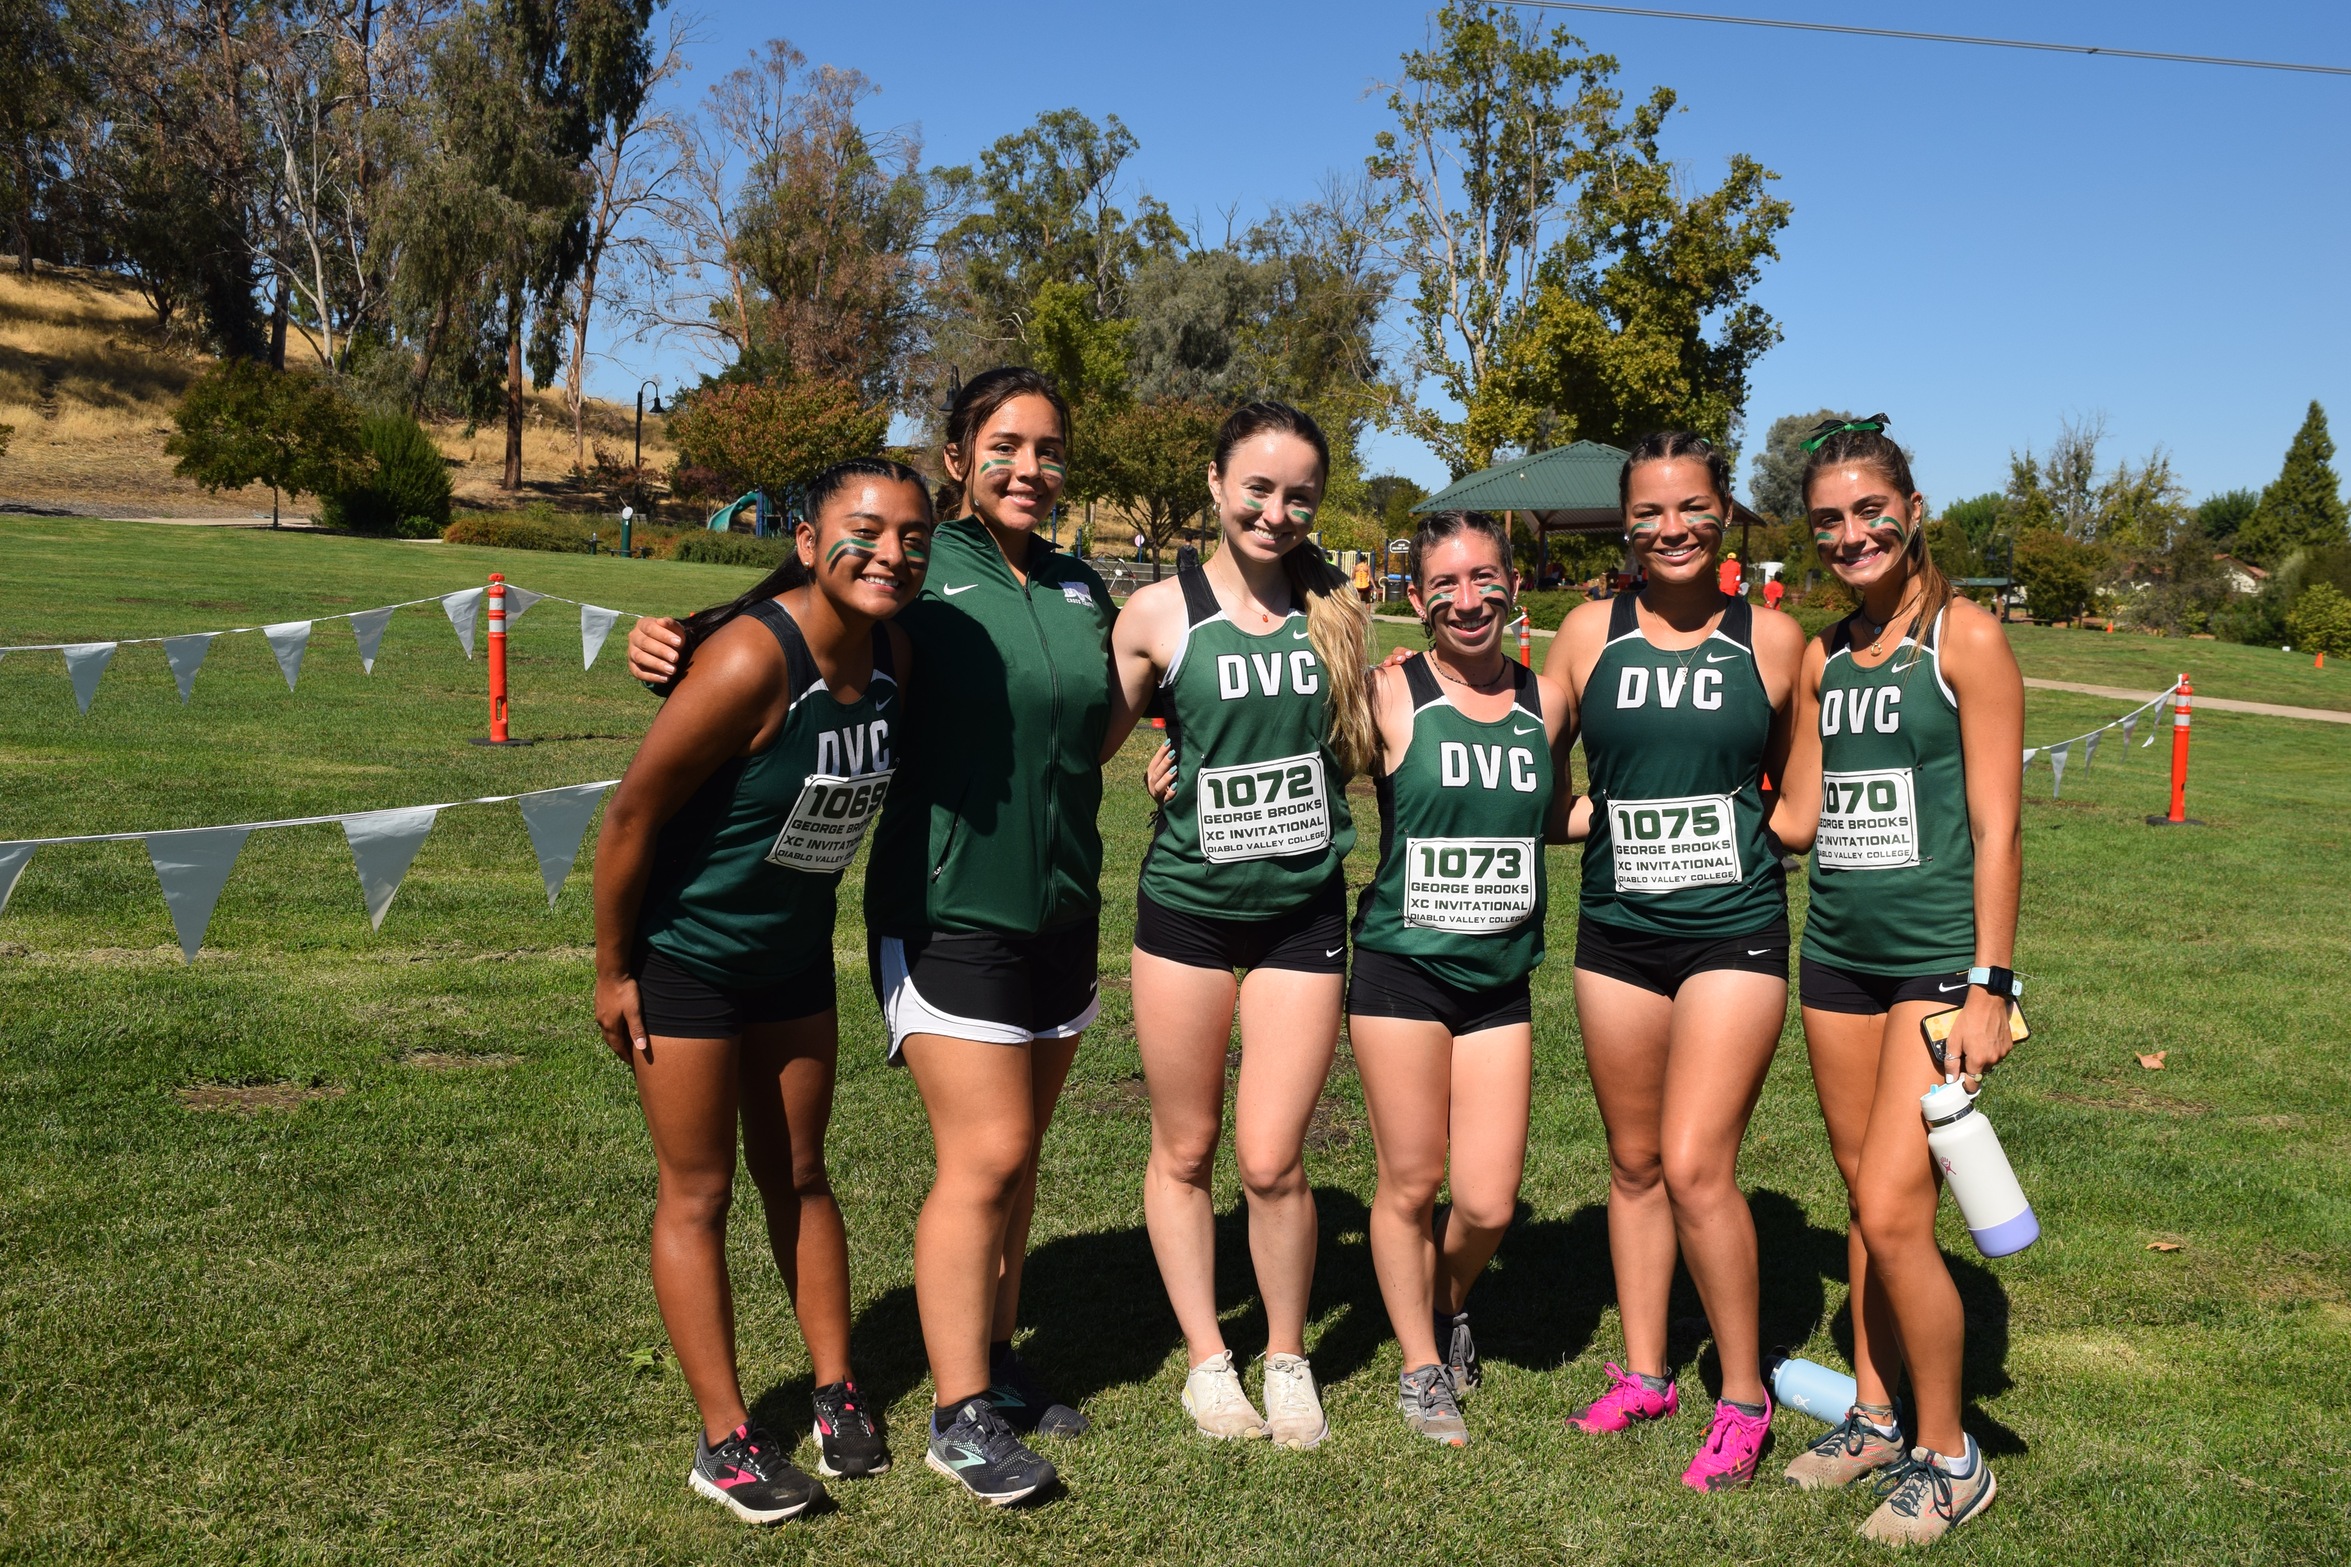 Women's Cross Country finishes 4th in George Brooks Memorial